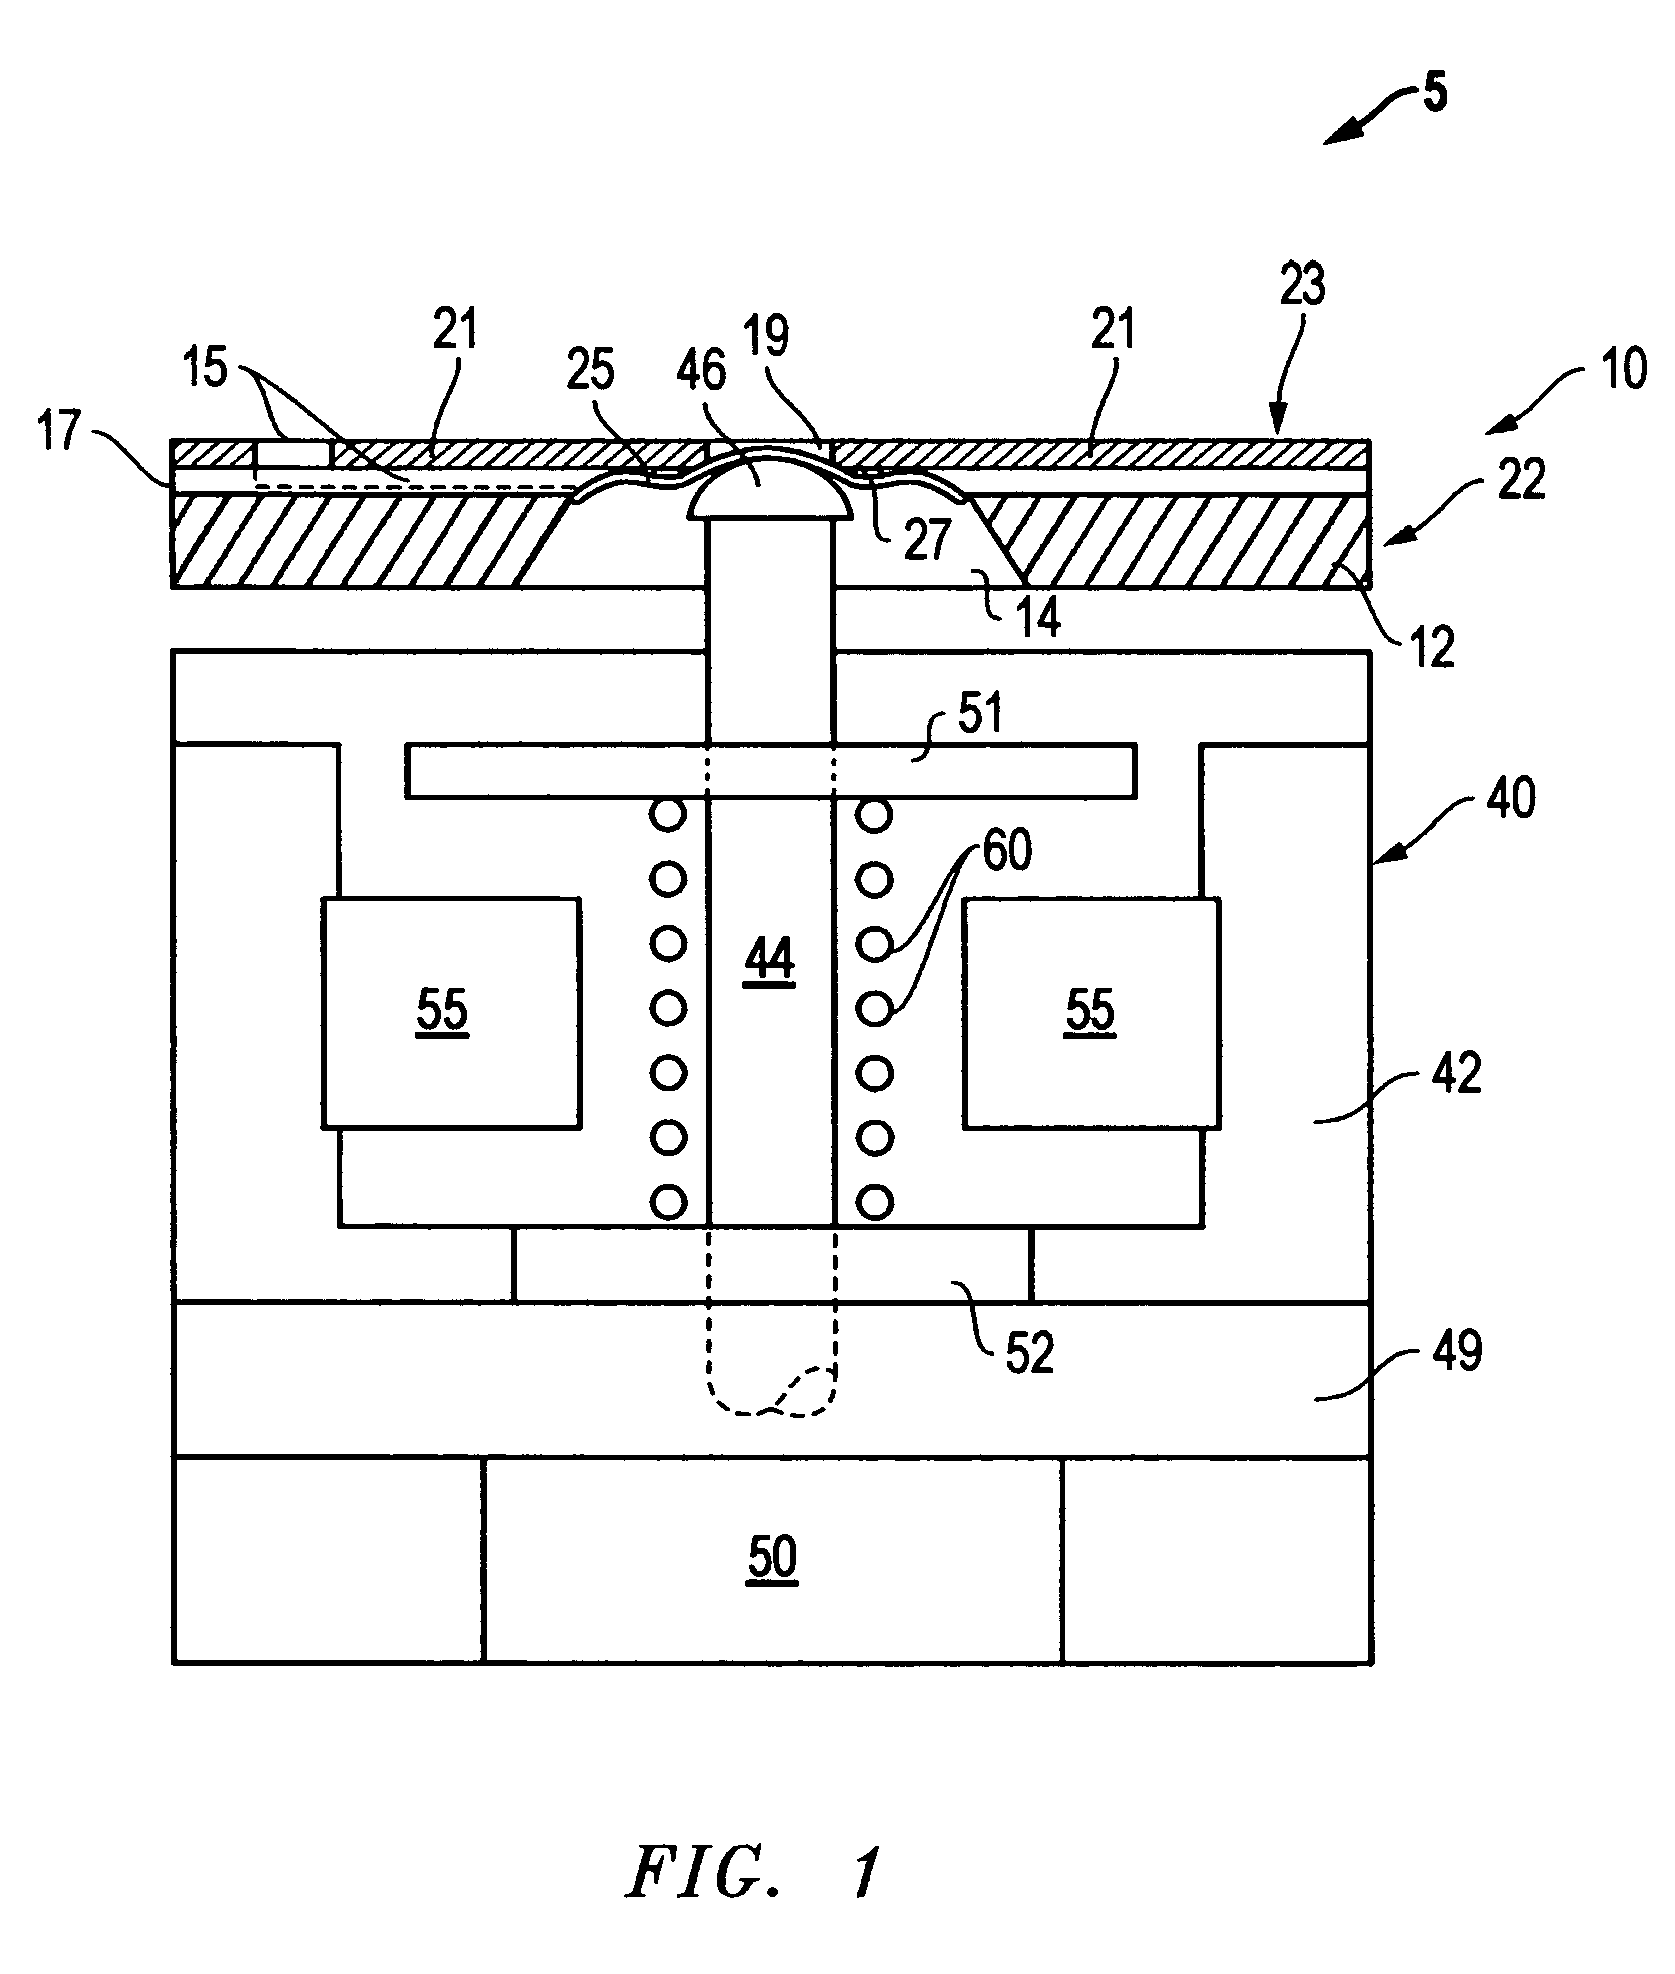 Apparatus and method for selectively channeling a fluid